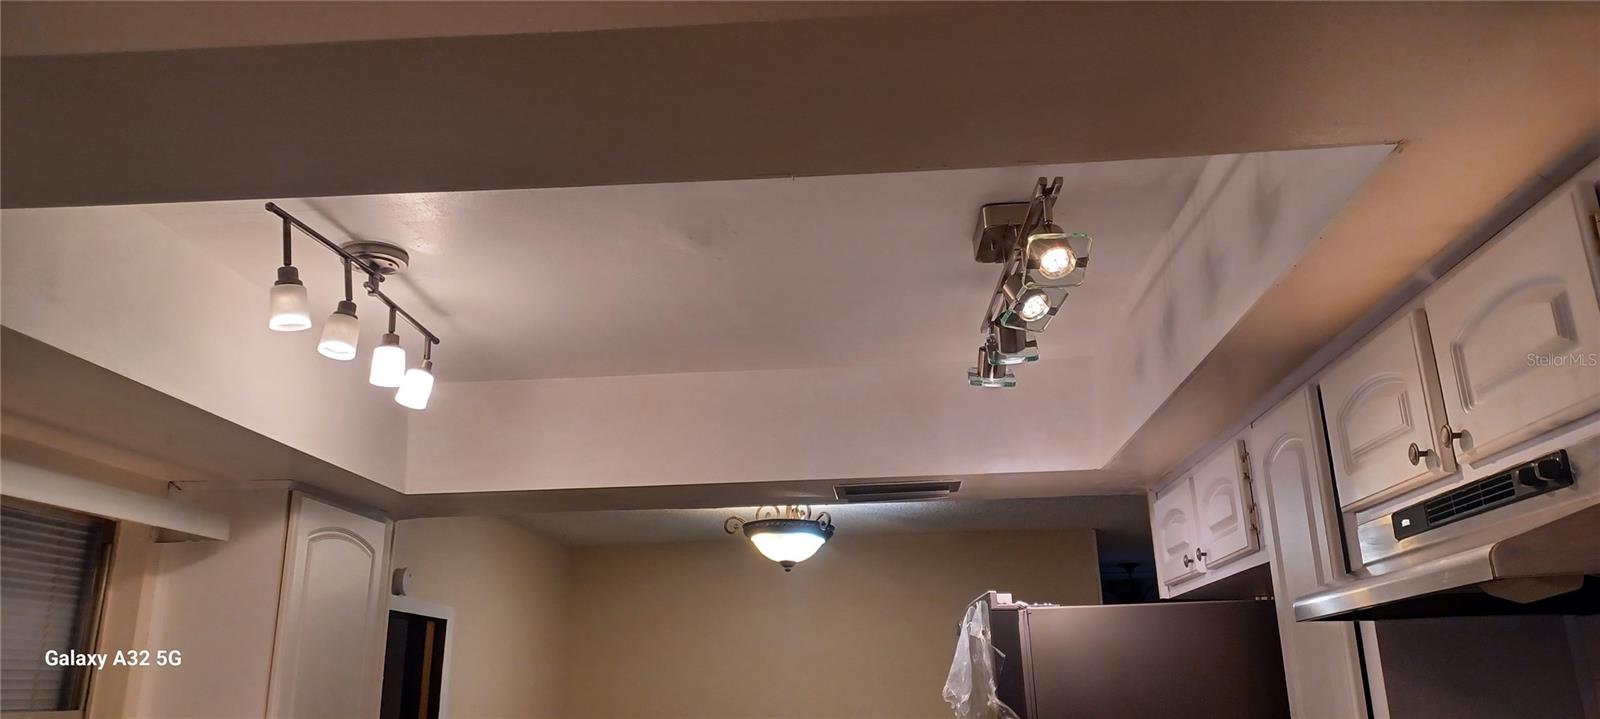 updated vault ceiling and new lights in kitchen